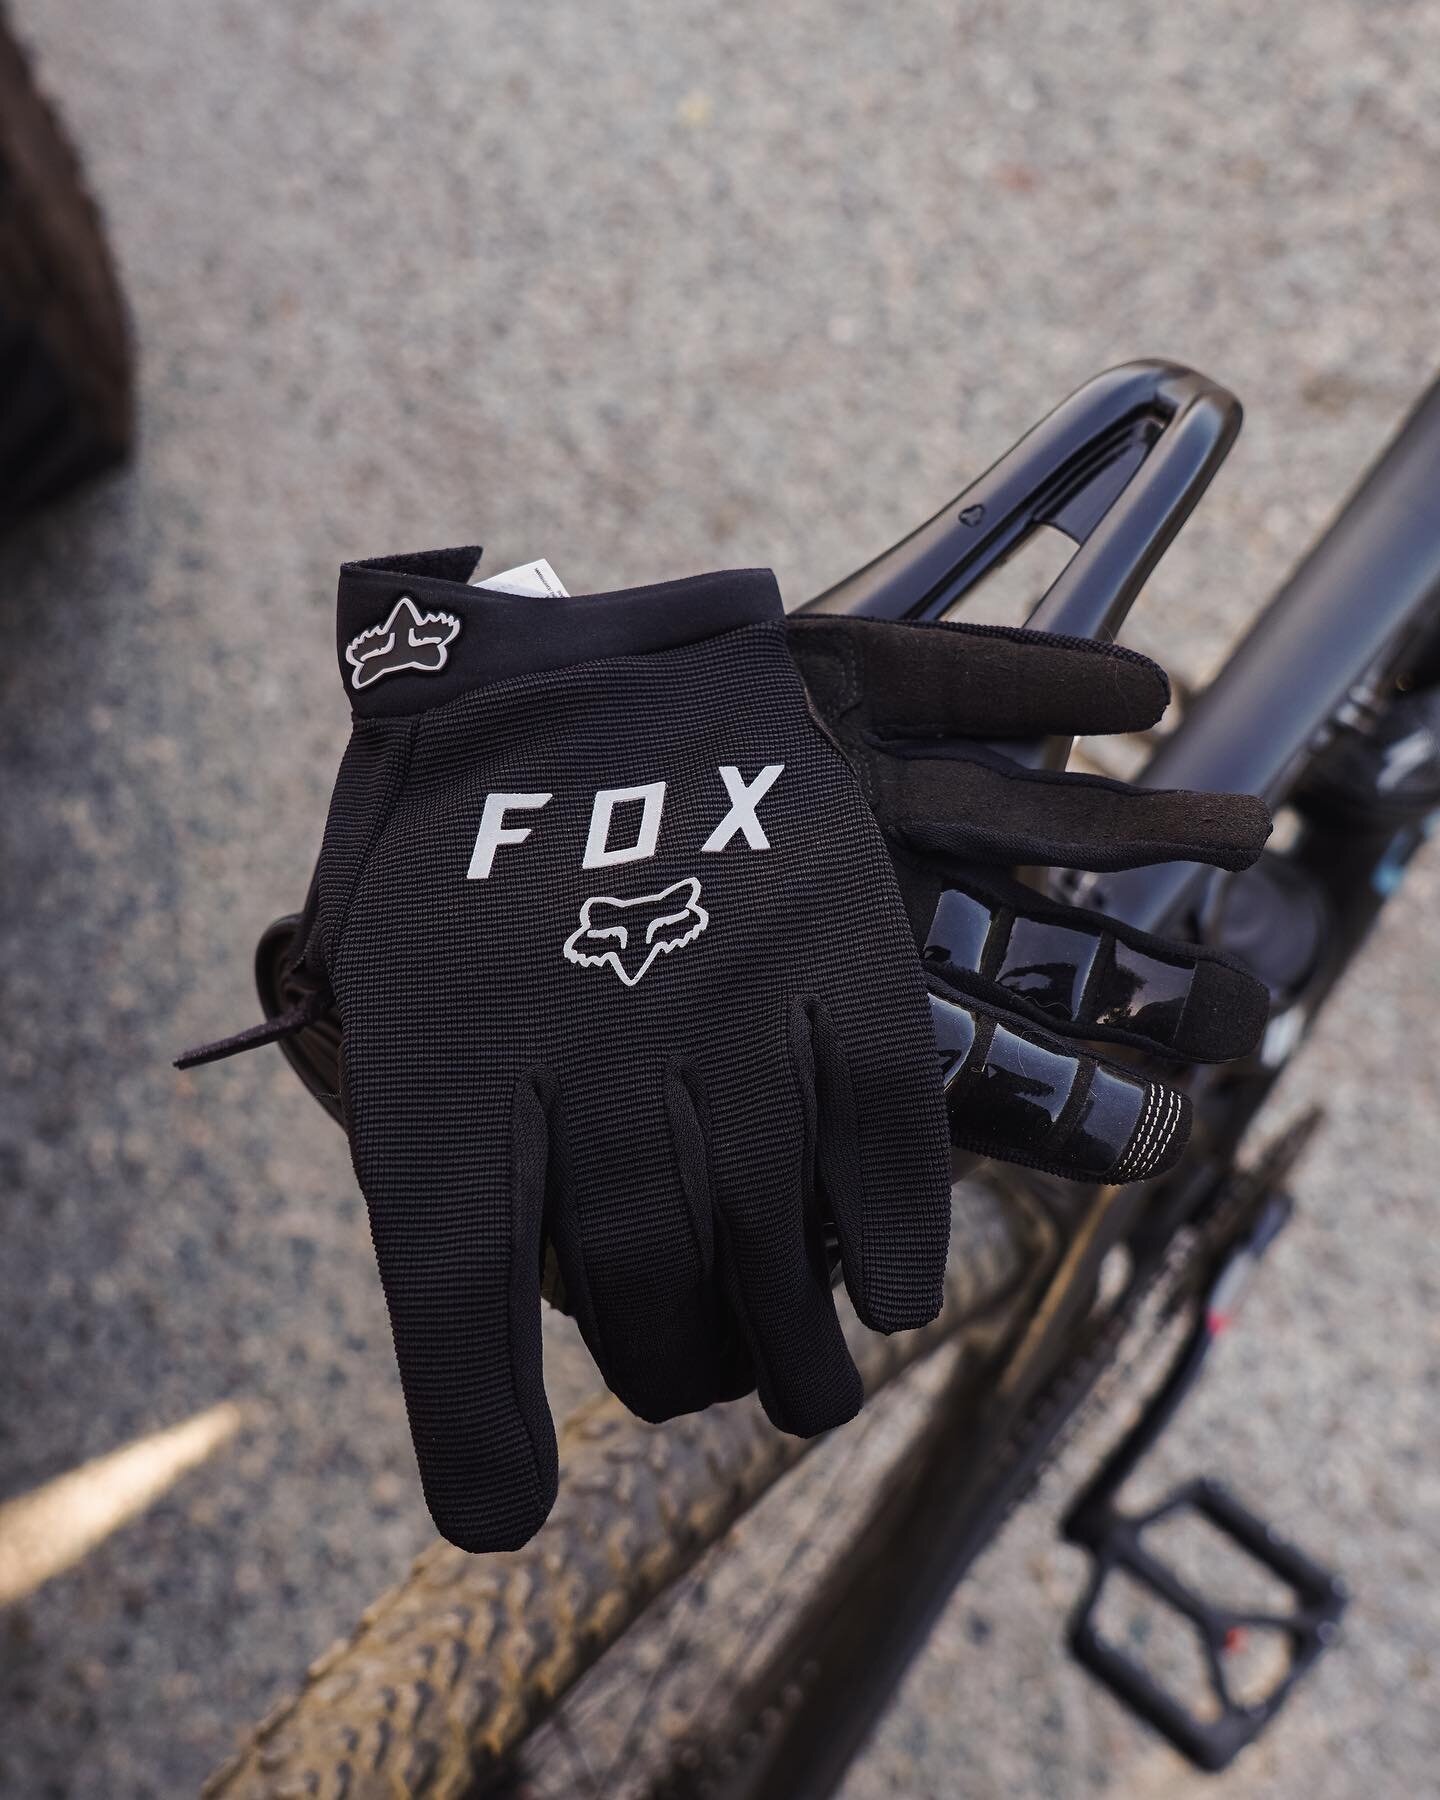 @ridefoxbike / @foxmtb been rocking these Ranger Gel gloves and they are super comfy. Prior to these I had a set of amazon special gloves and they were awful! The fitment on these is nice, if you already know your gloves Size they are pretty true to 